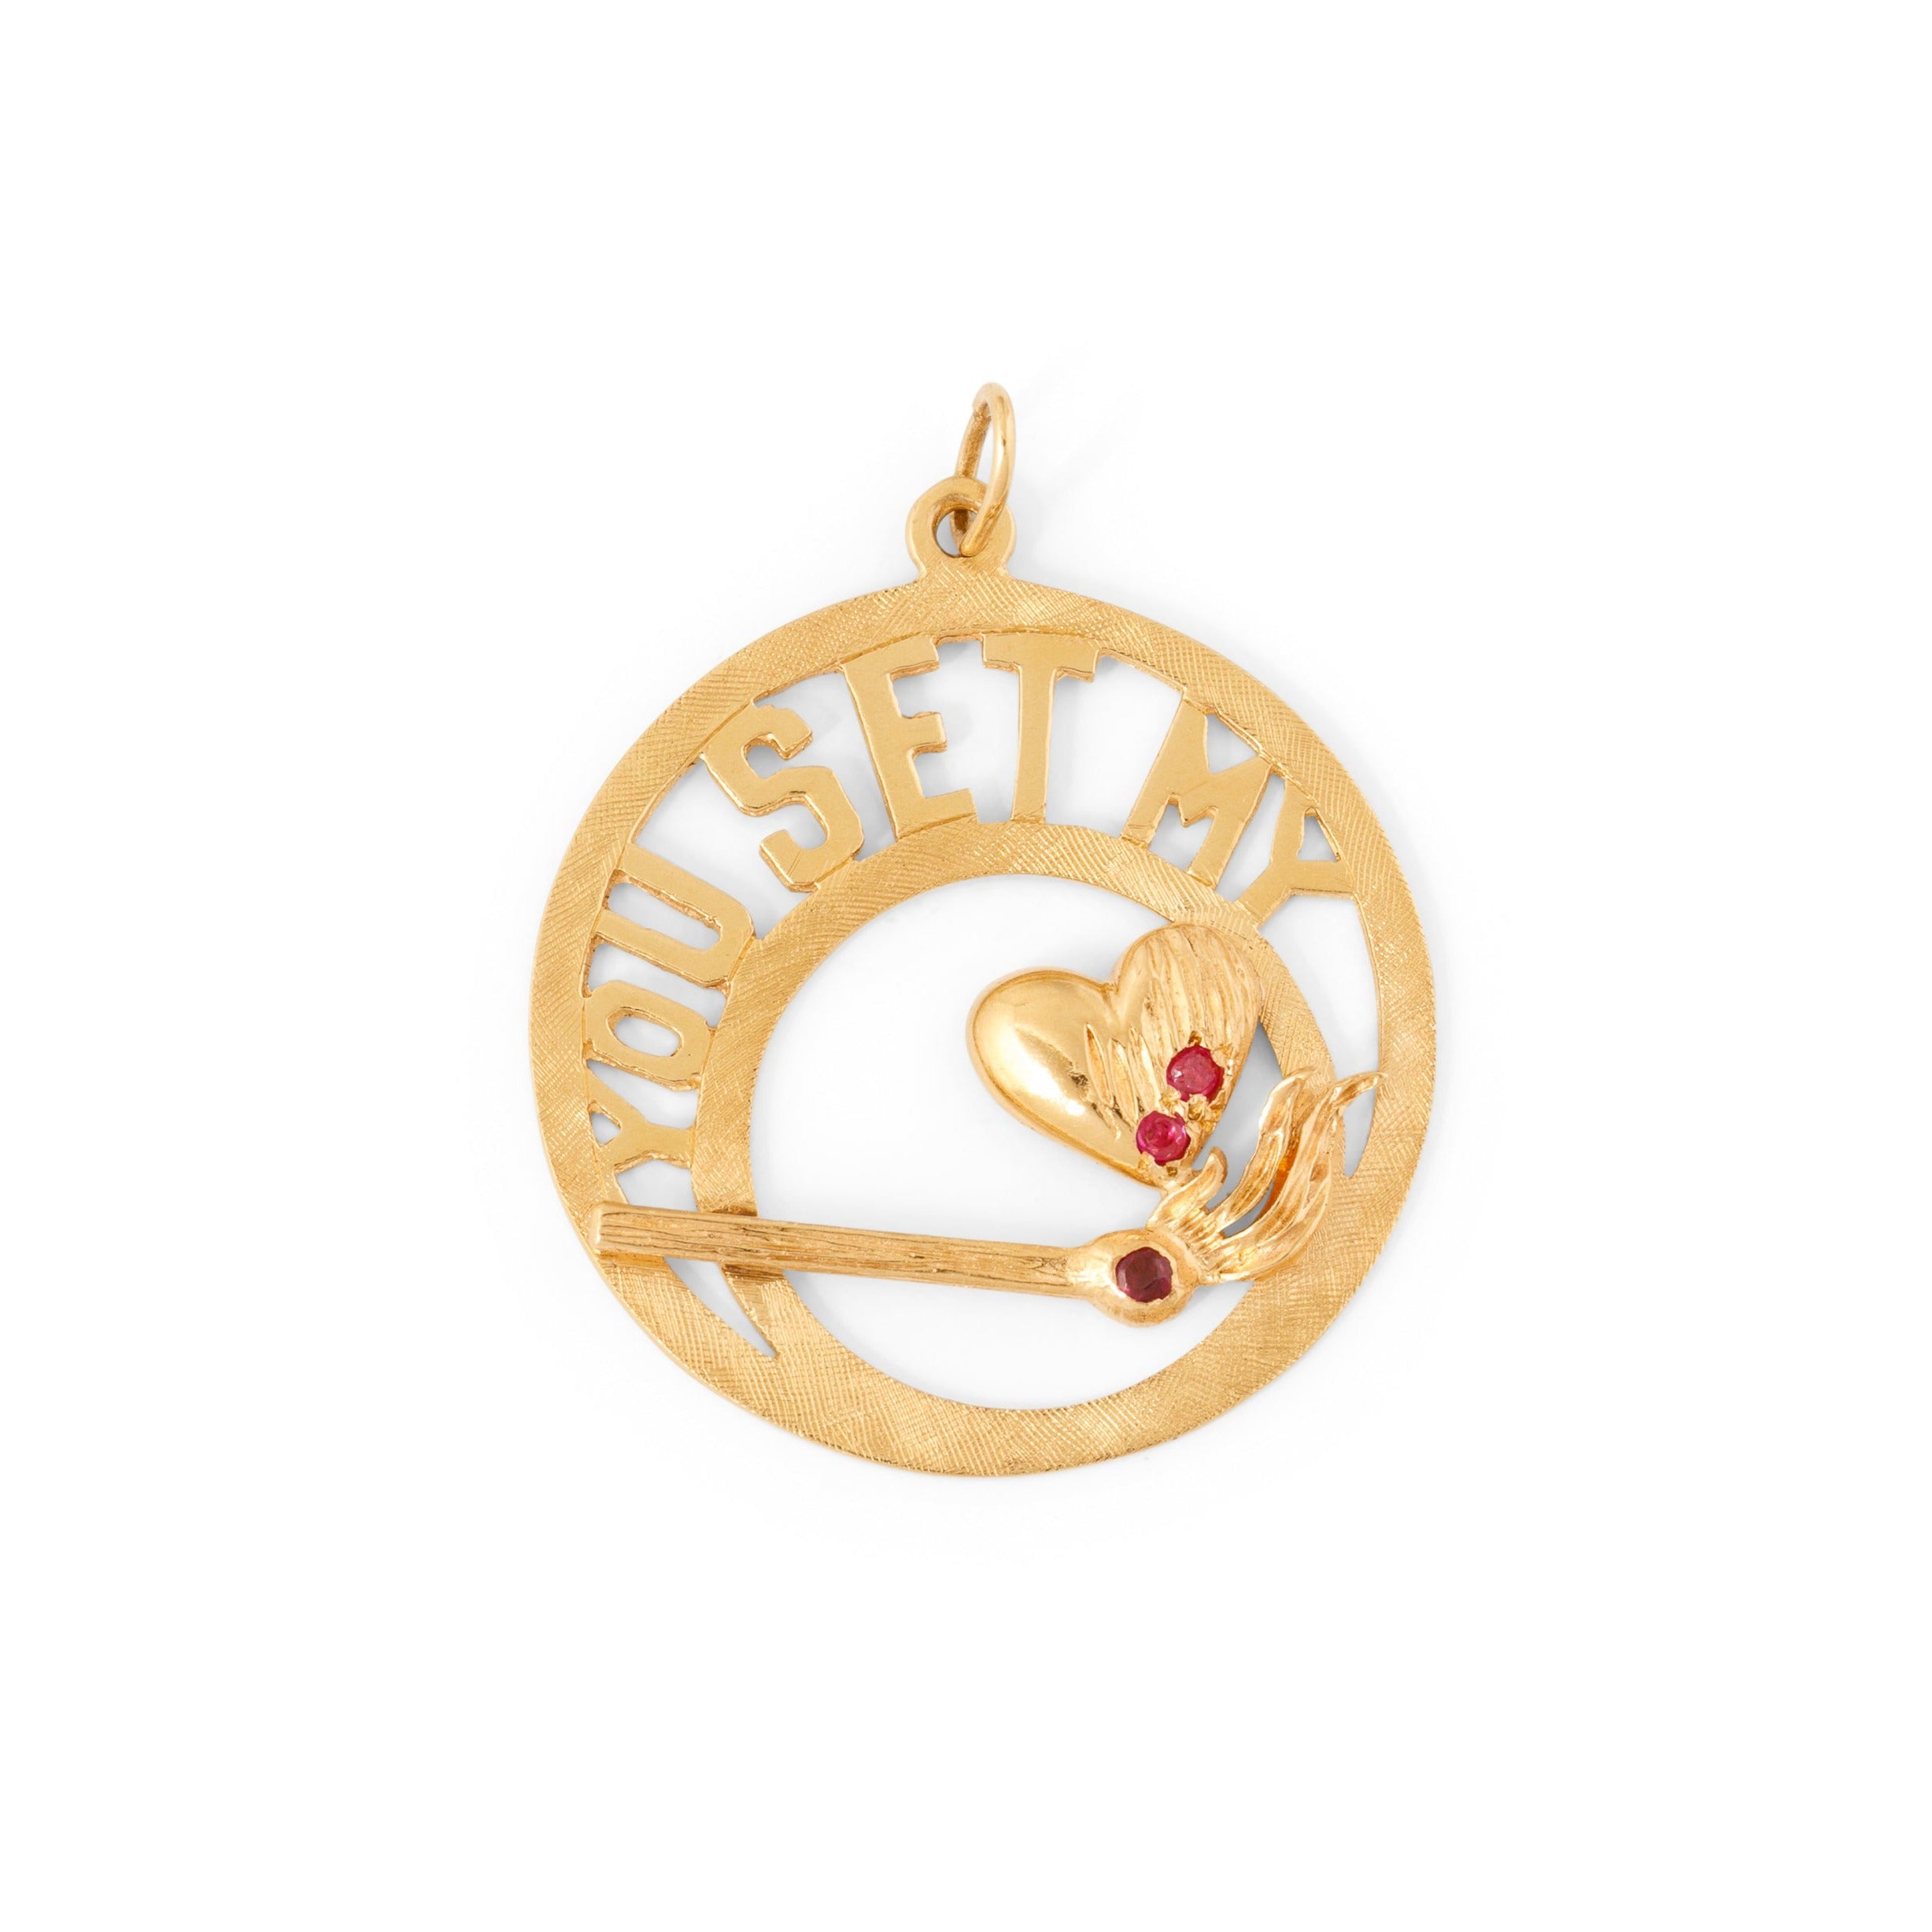 You Set My Heart On Fire 14k Gold Charm